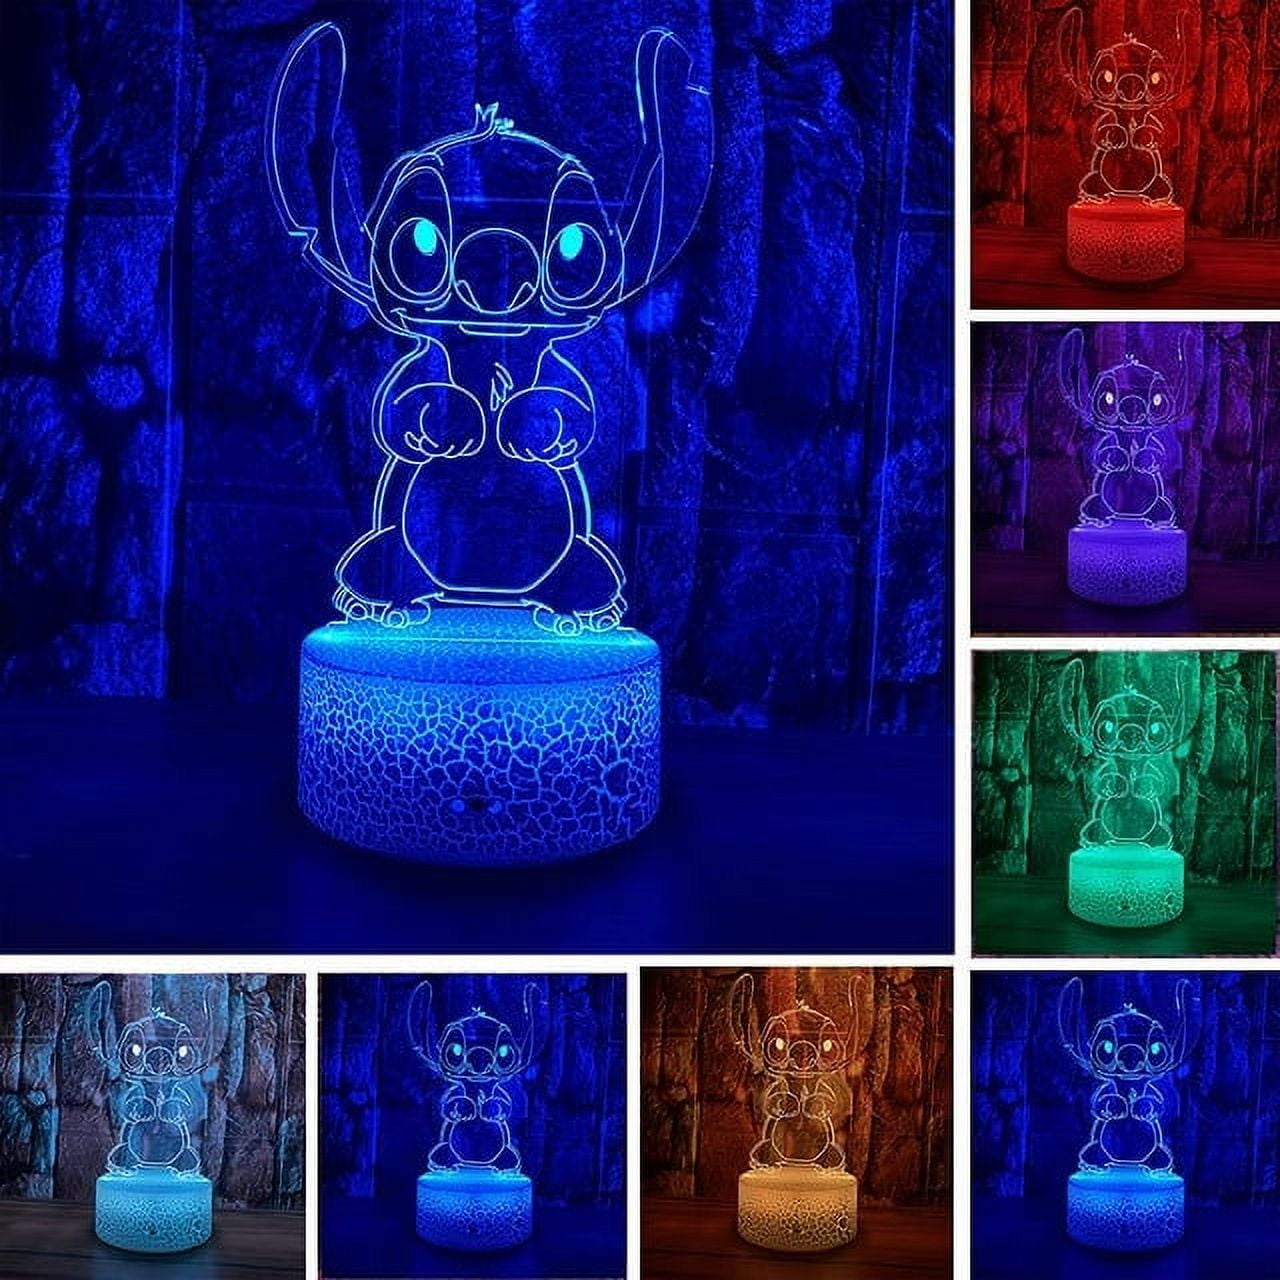  AmazerGift Stitch Gifts, Stitch Night Light for Kids, Christmas  and Birthday Party Supplies for Boys/Girls, Stitch Decoration 3D Night Light,  16 Colors Change with Remote : Home & Kitchen